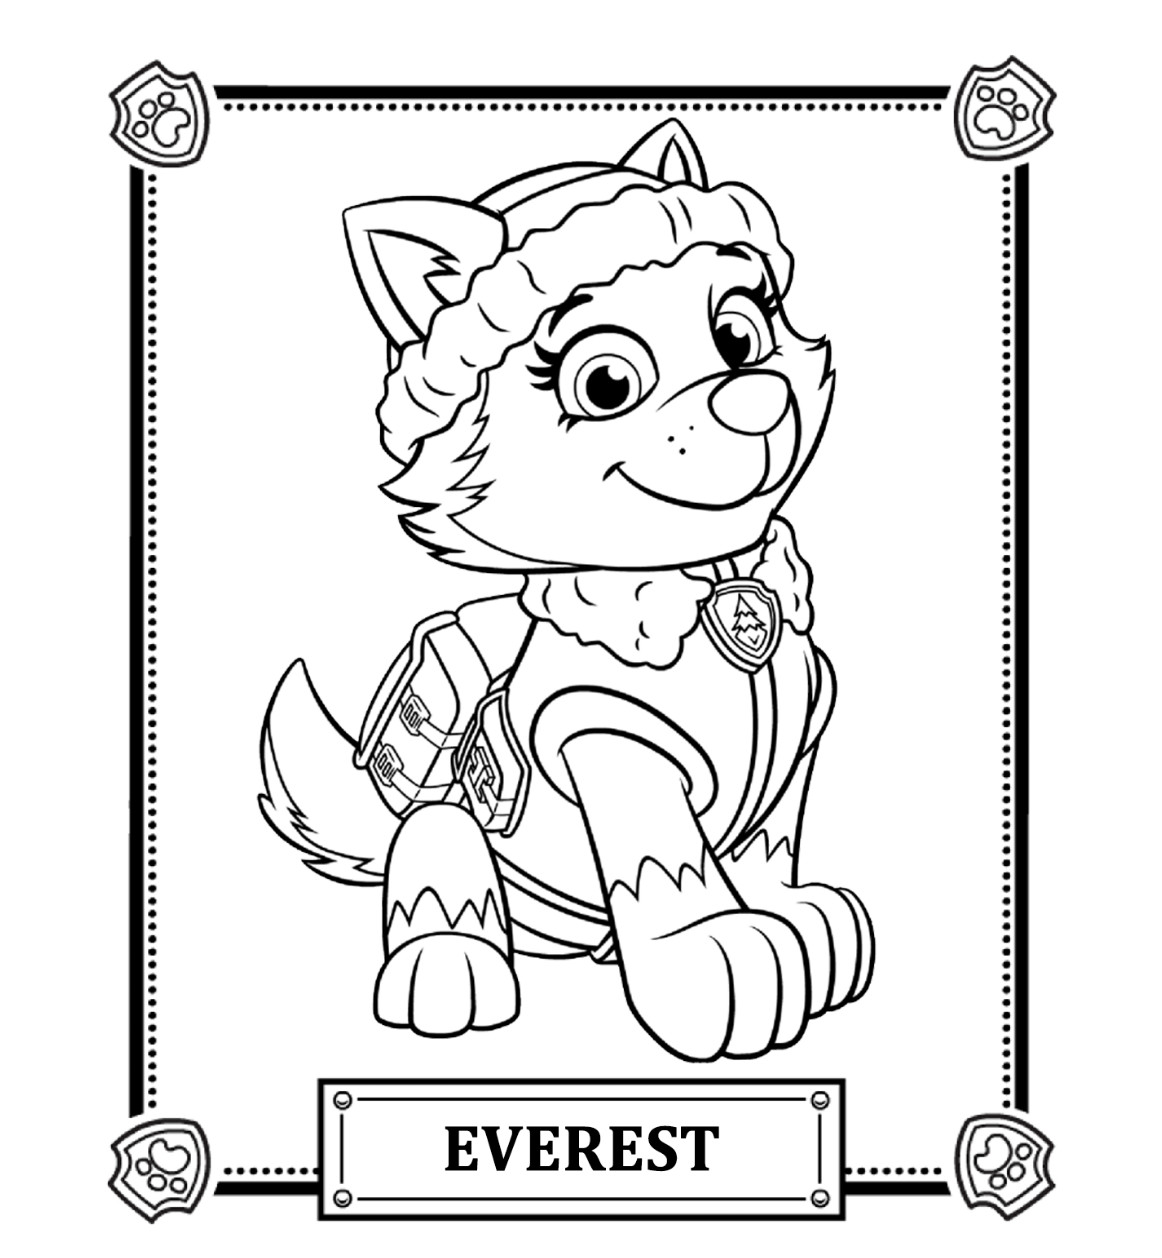 Coloring Pages Boys Paw Patrol Easter
 Paw Patrol Coloring Pages Best Coloring Pages For Kids